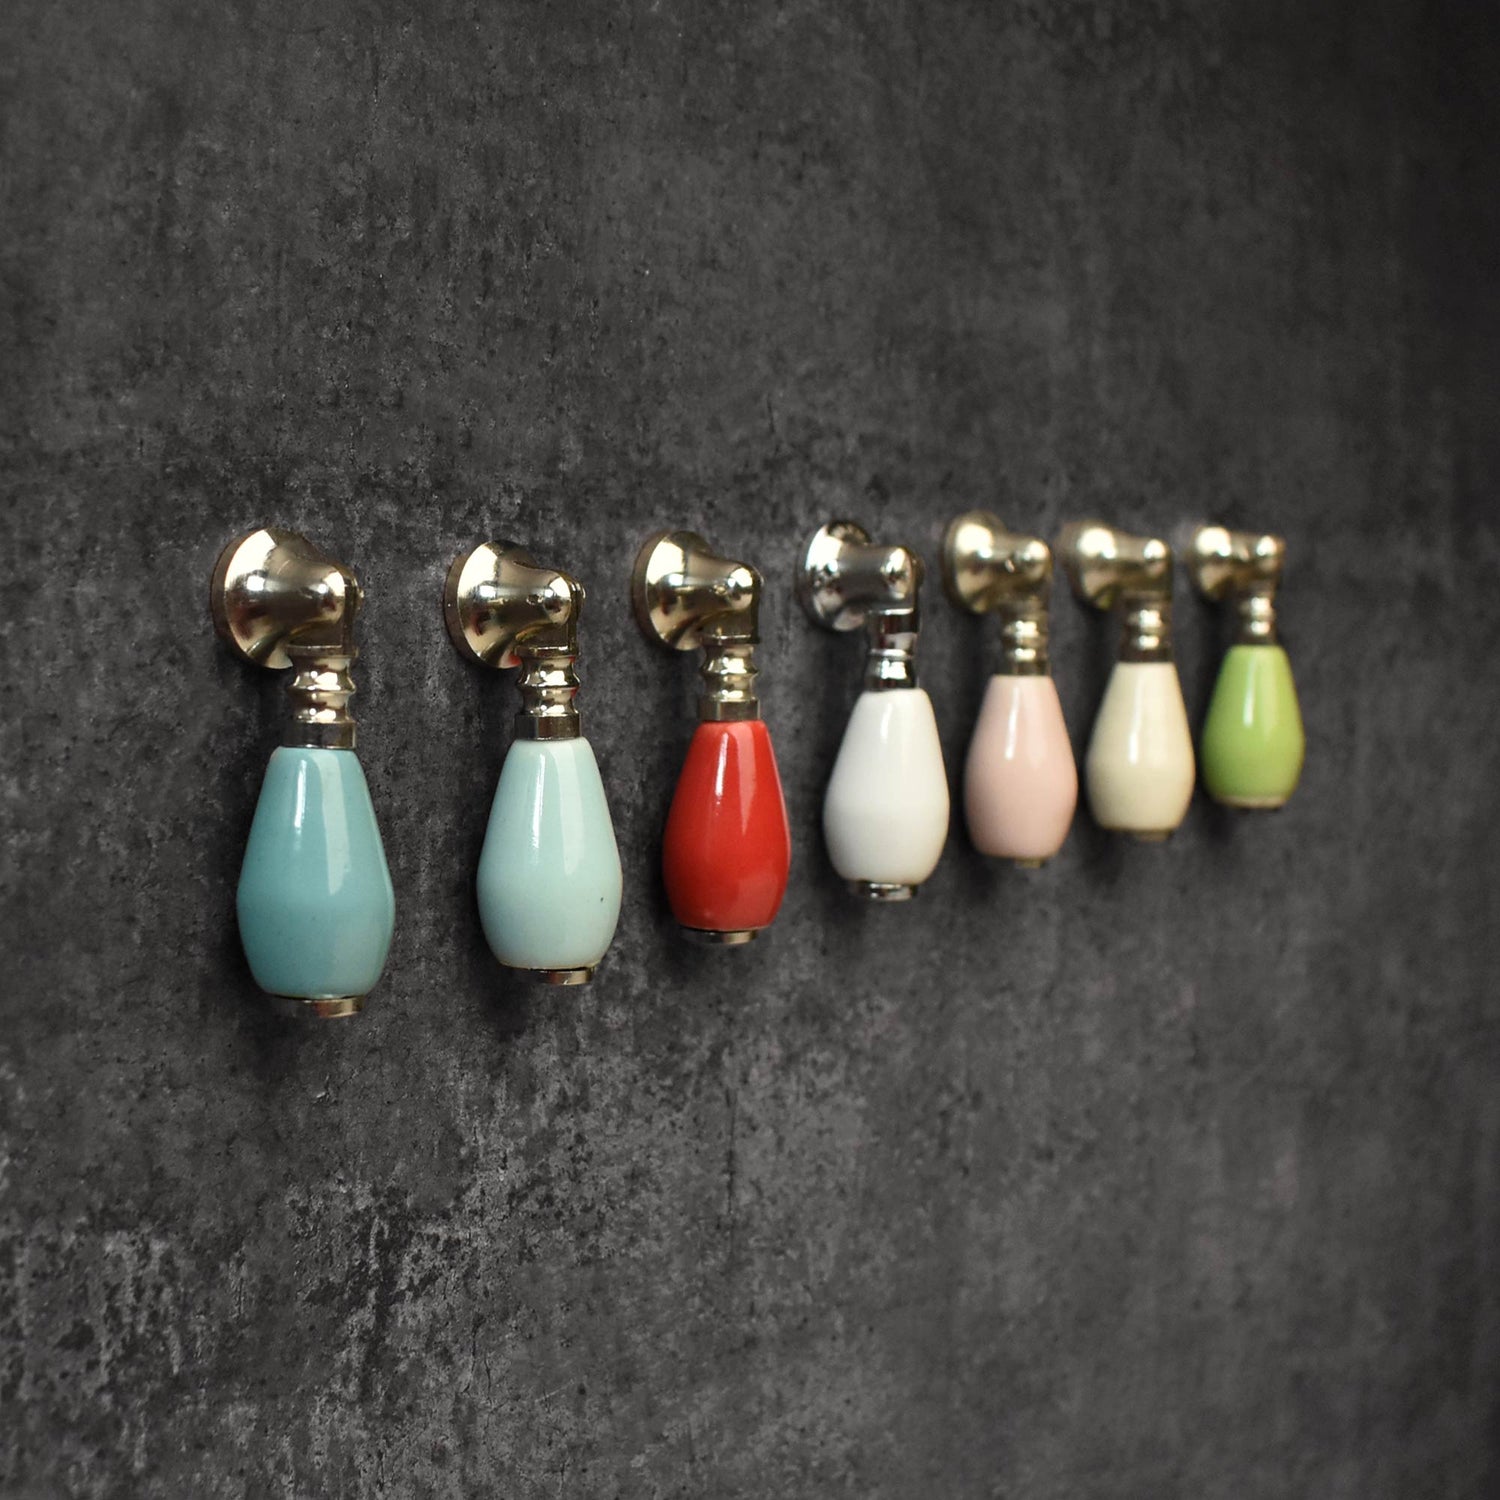 Ceramic hanging pulls for cabinets and drawers